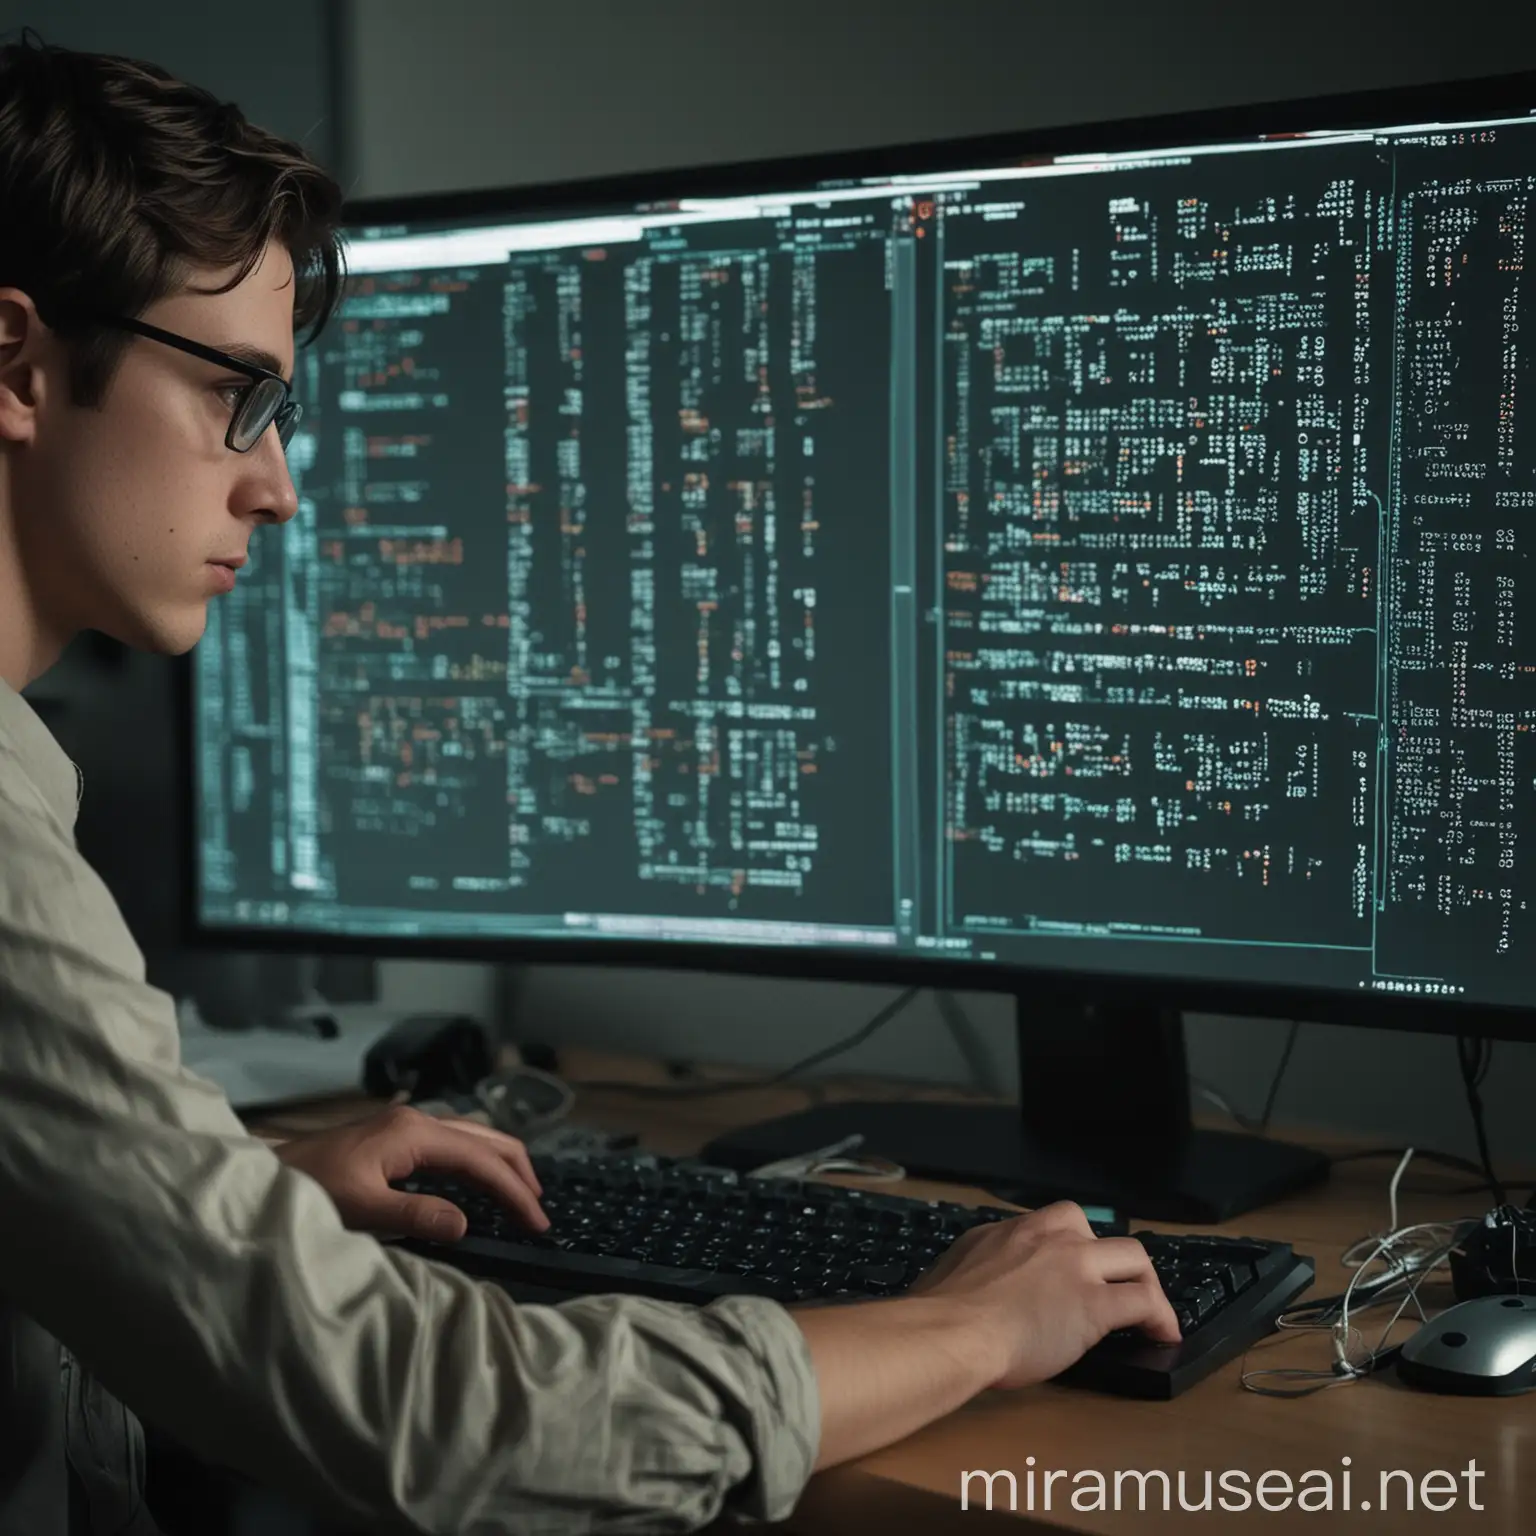 Focused Programmer Analyzing Security Tools on Computer